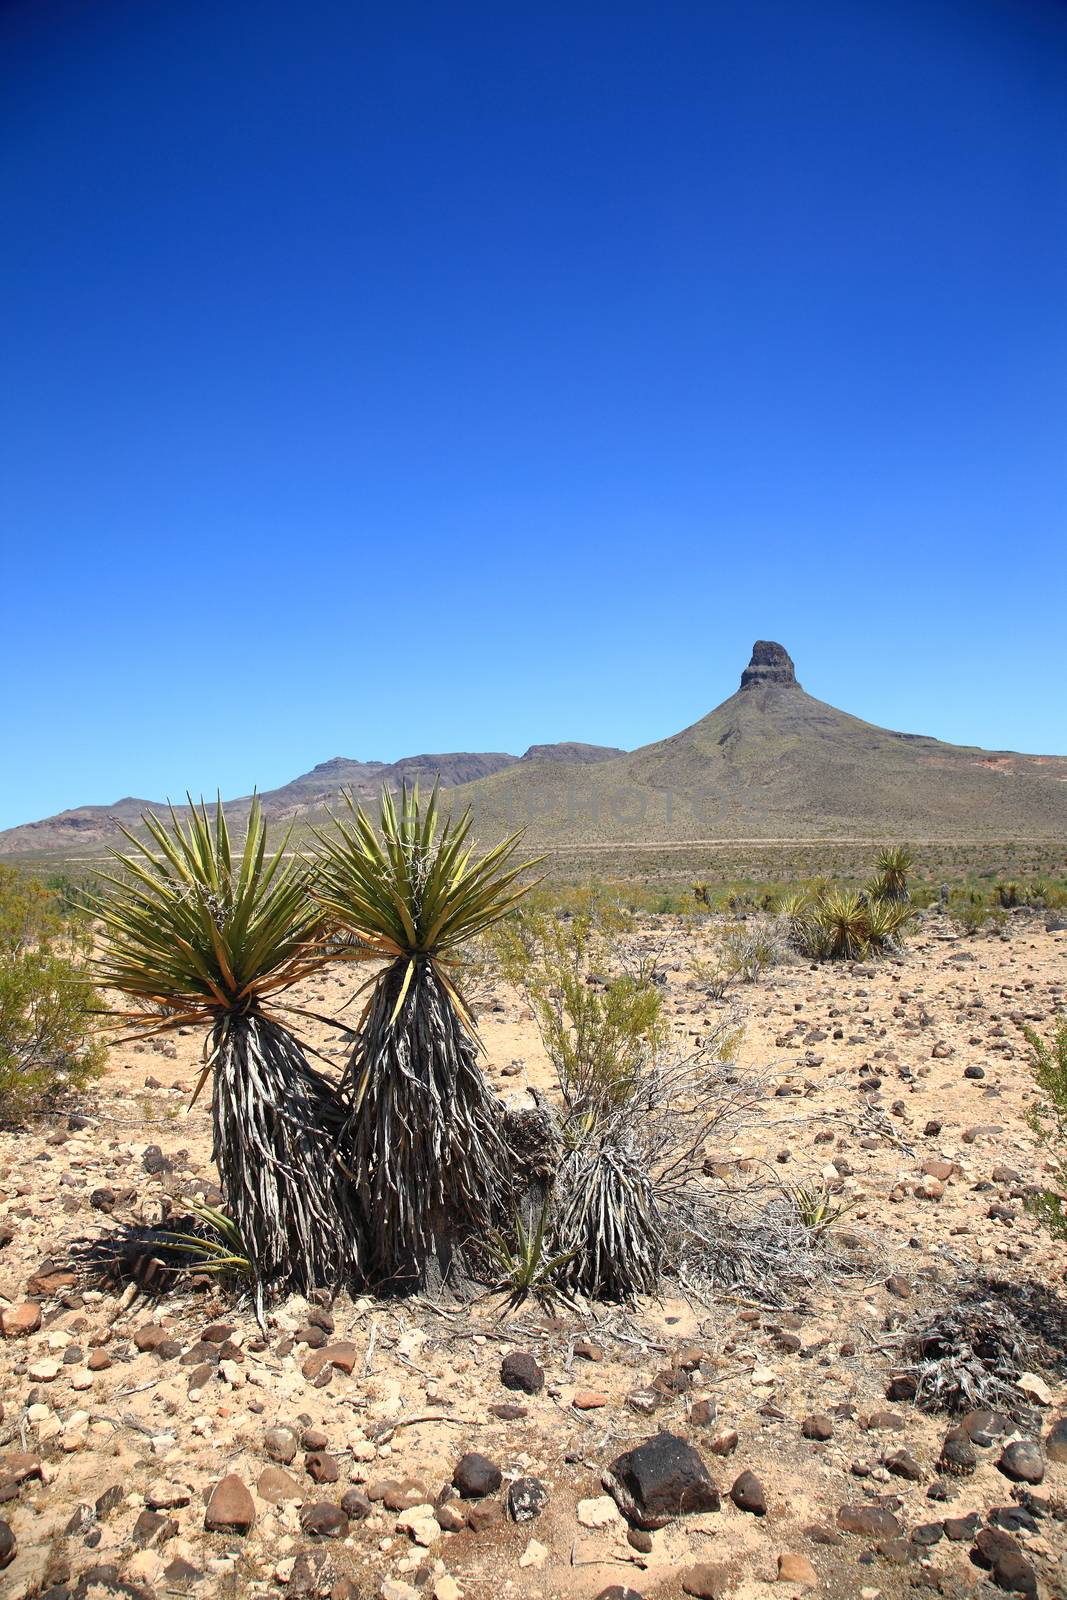 Mountains and remote landscape with desert plants.